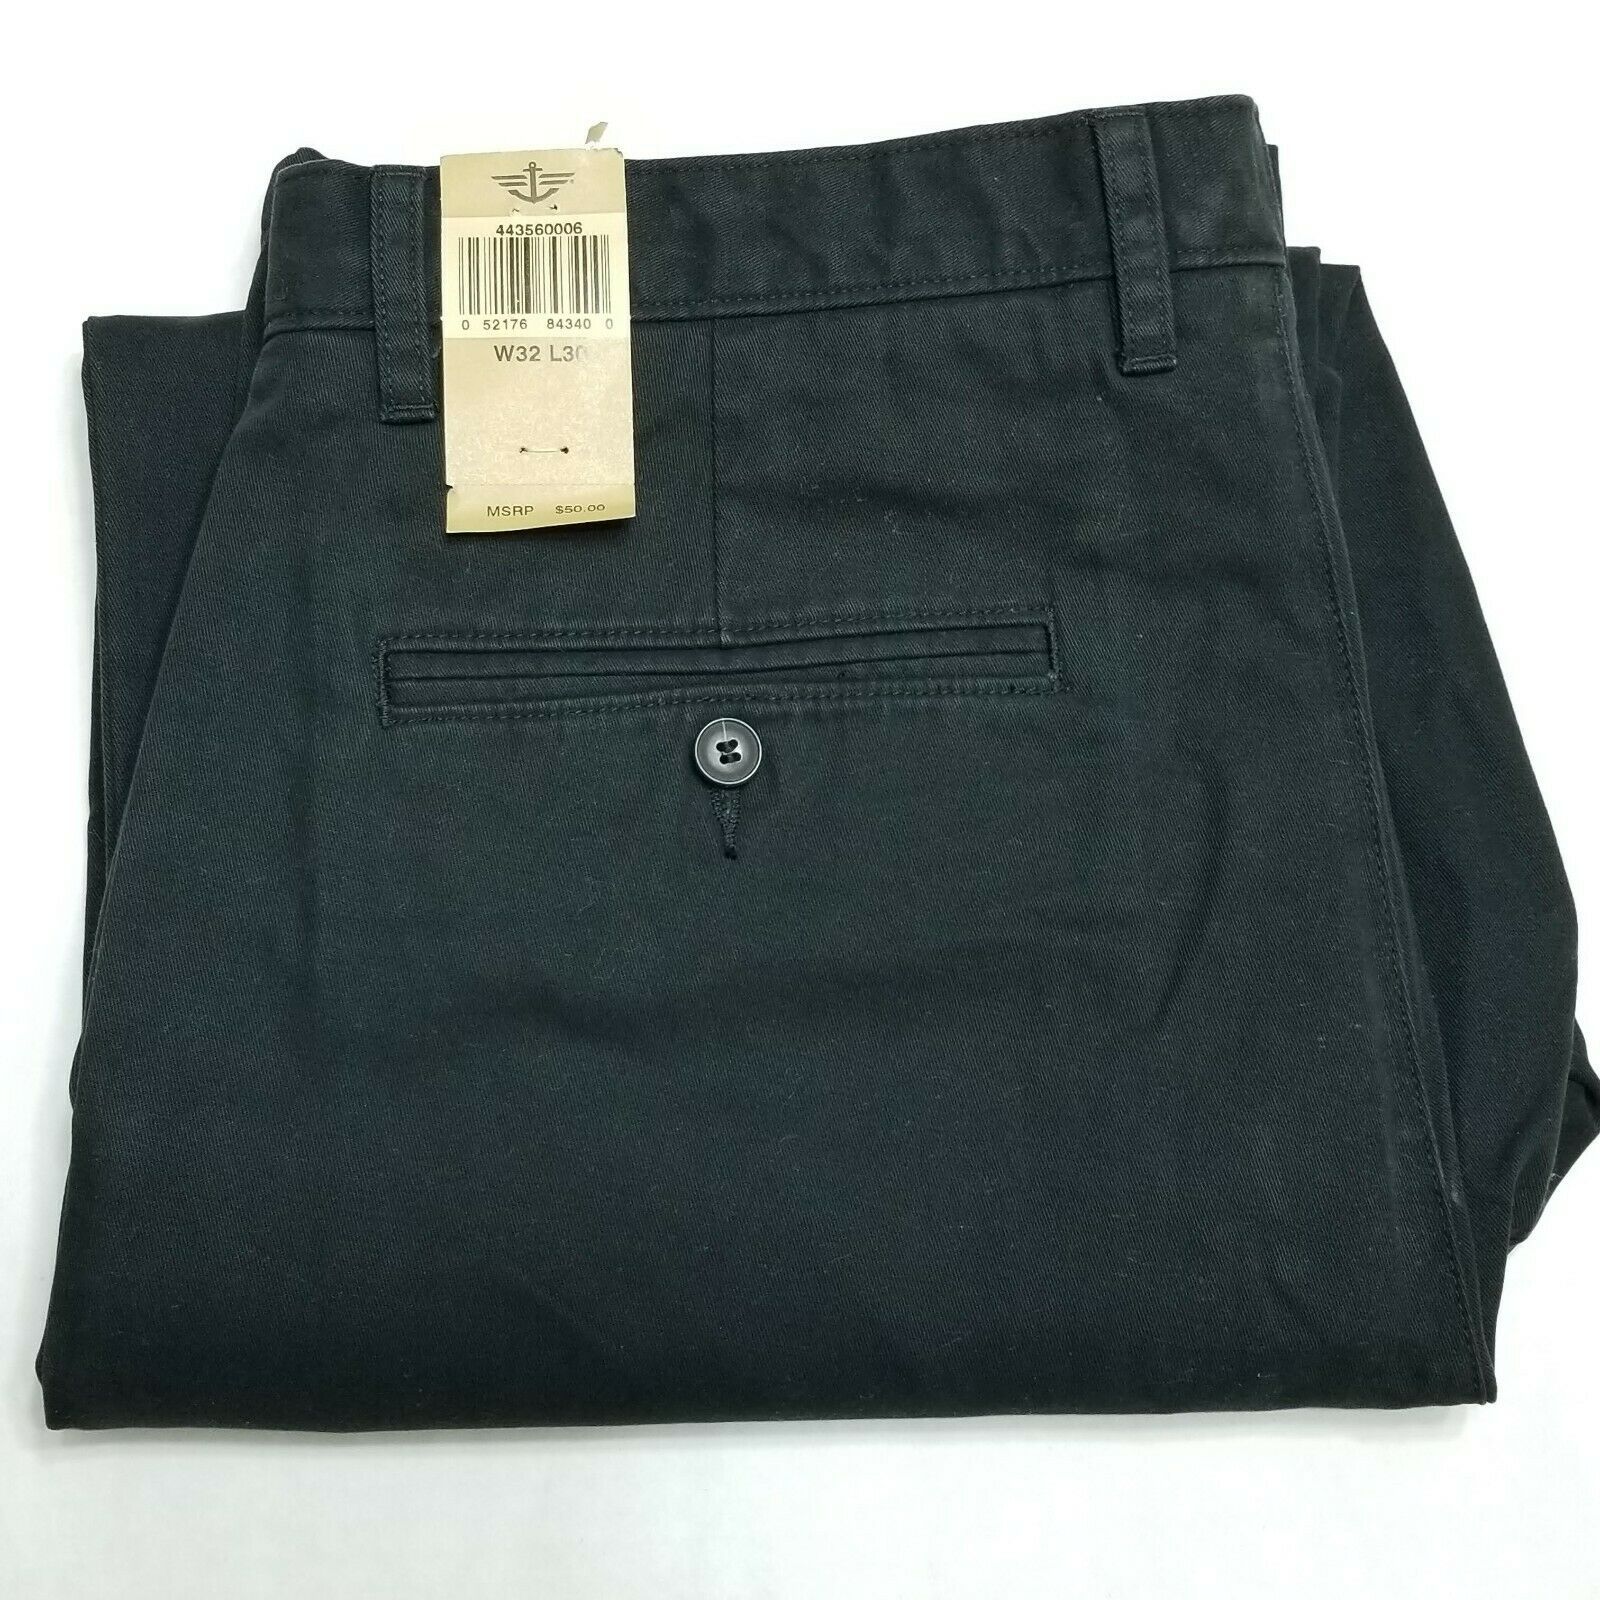 Dockers D3 Classic Fit, Flat Front pants - Black - 32x30 - NEW WITH TAGS - $29.70